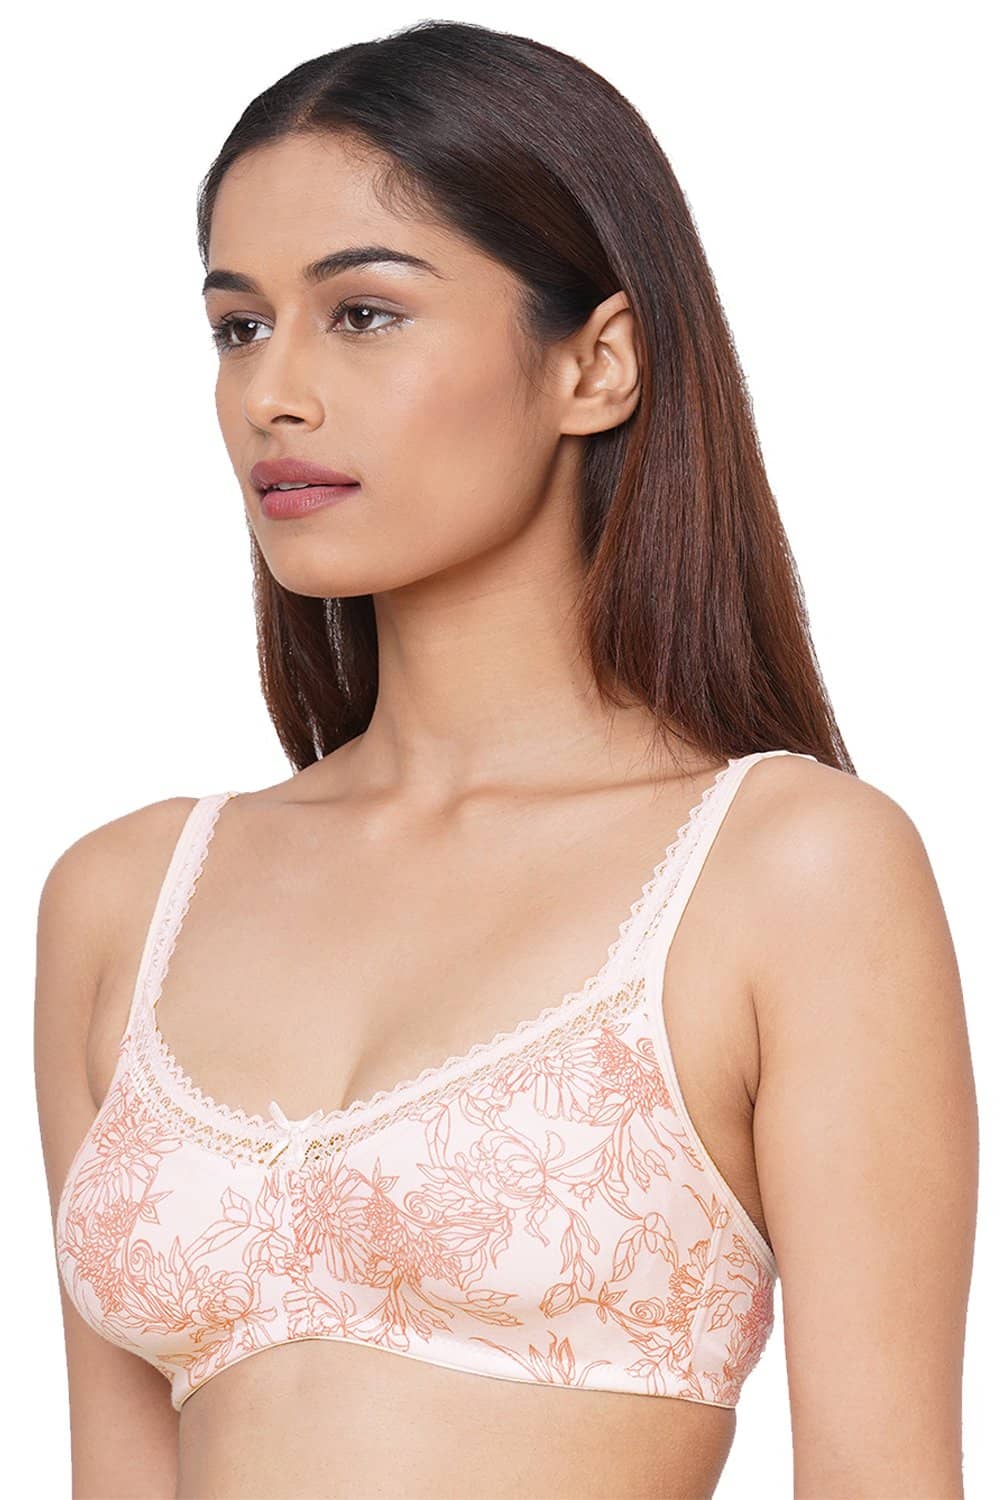 Organic Cotton Antimicrobial Soft Laced Bra (Pack of 2)-ISB017-Peach_Carrot Print-